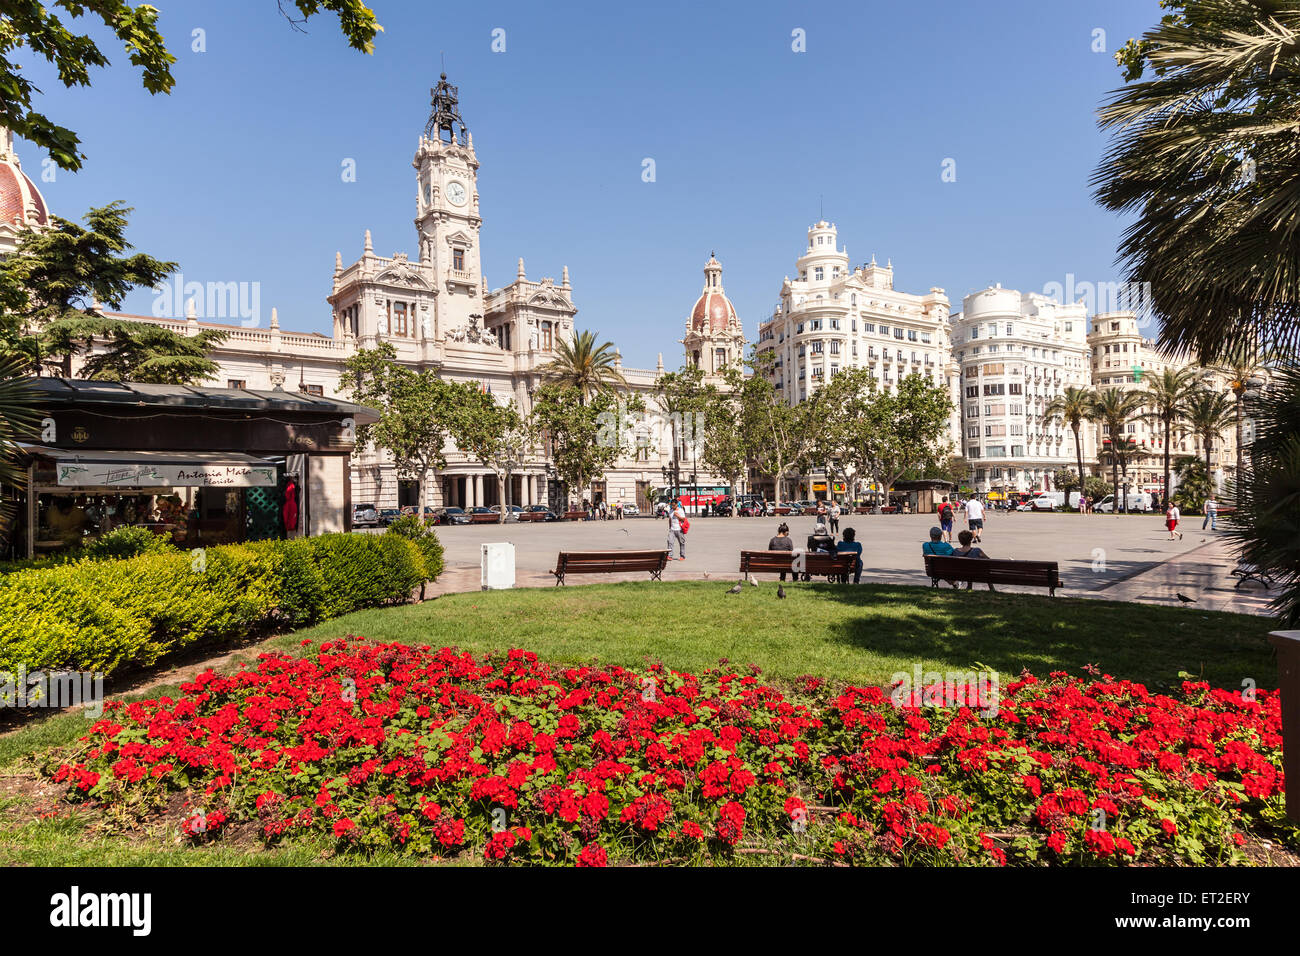 Red flowers at the Plaza de Ayuntamiento square in the city of Valencia, Spain Stock Photo